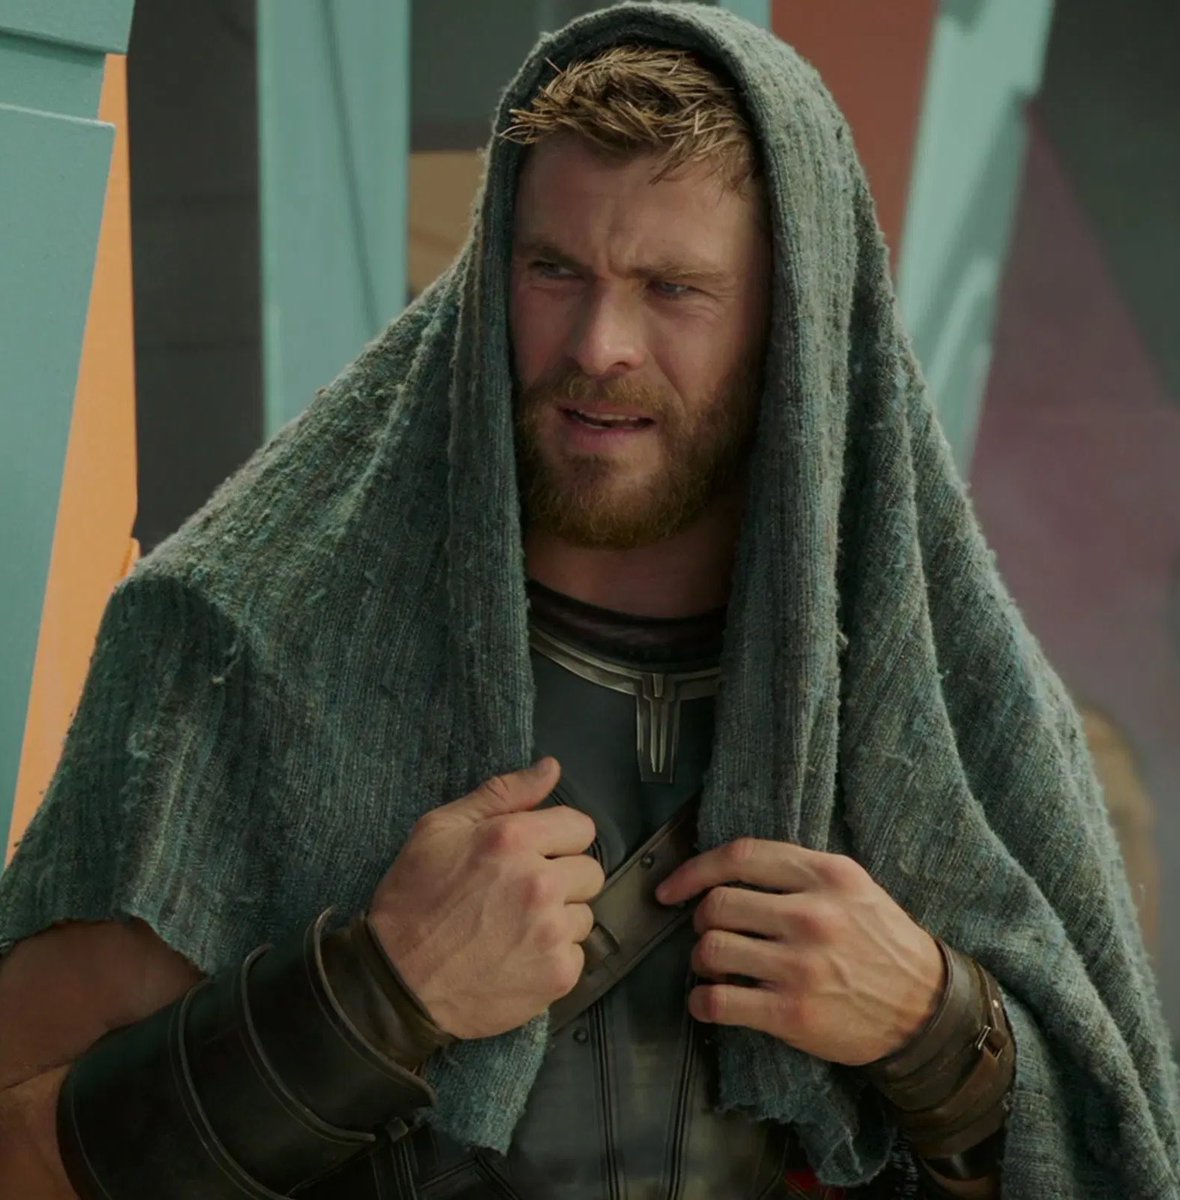 RT @Bippty: soft thor stans rise up!! https://t.co/51O2FDSKdW